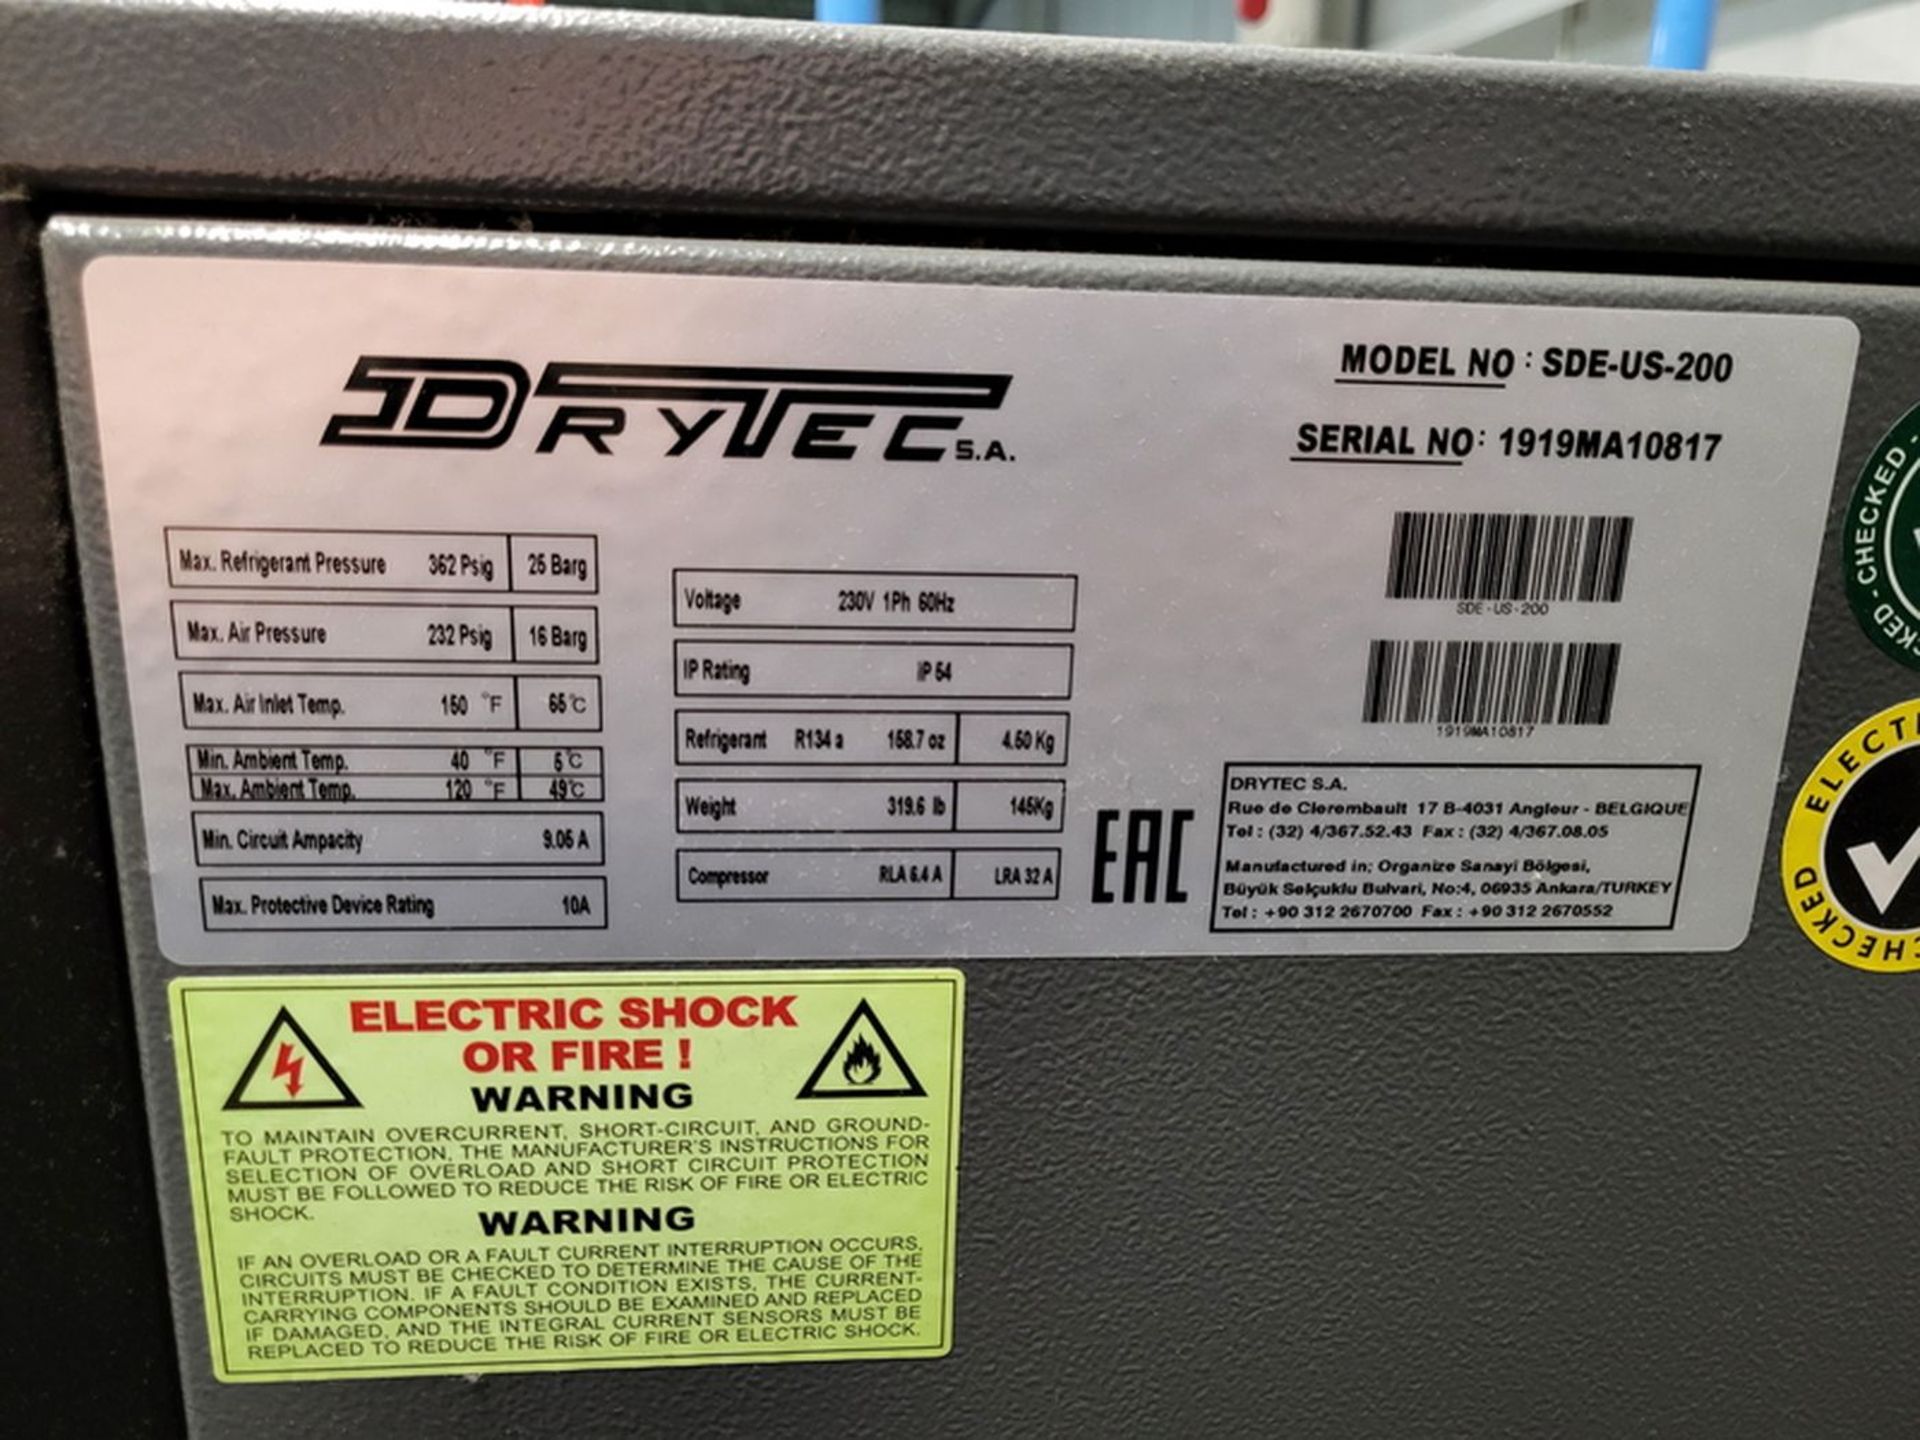 DryTec Model SDE-US-200 Refrigerated Air Dryer, S/N: 1919MA10817 (2017 est.); 362 PSIG Max. Comp. - Image 2 of 2